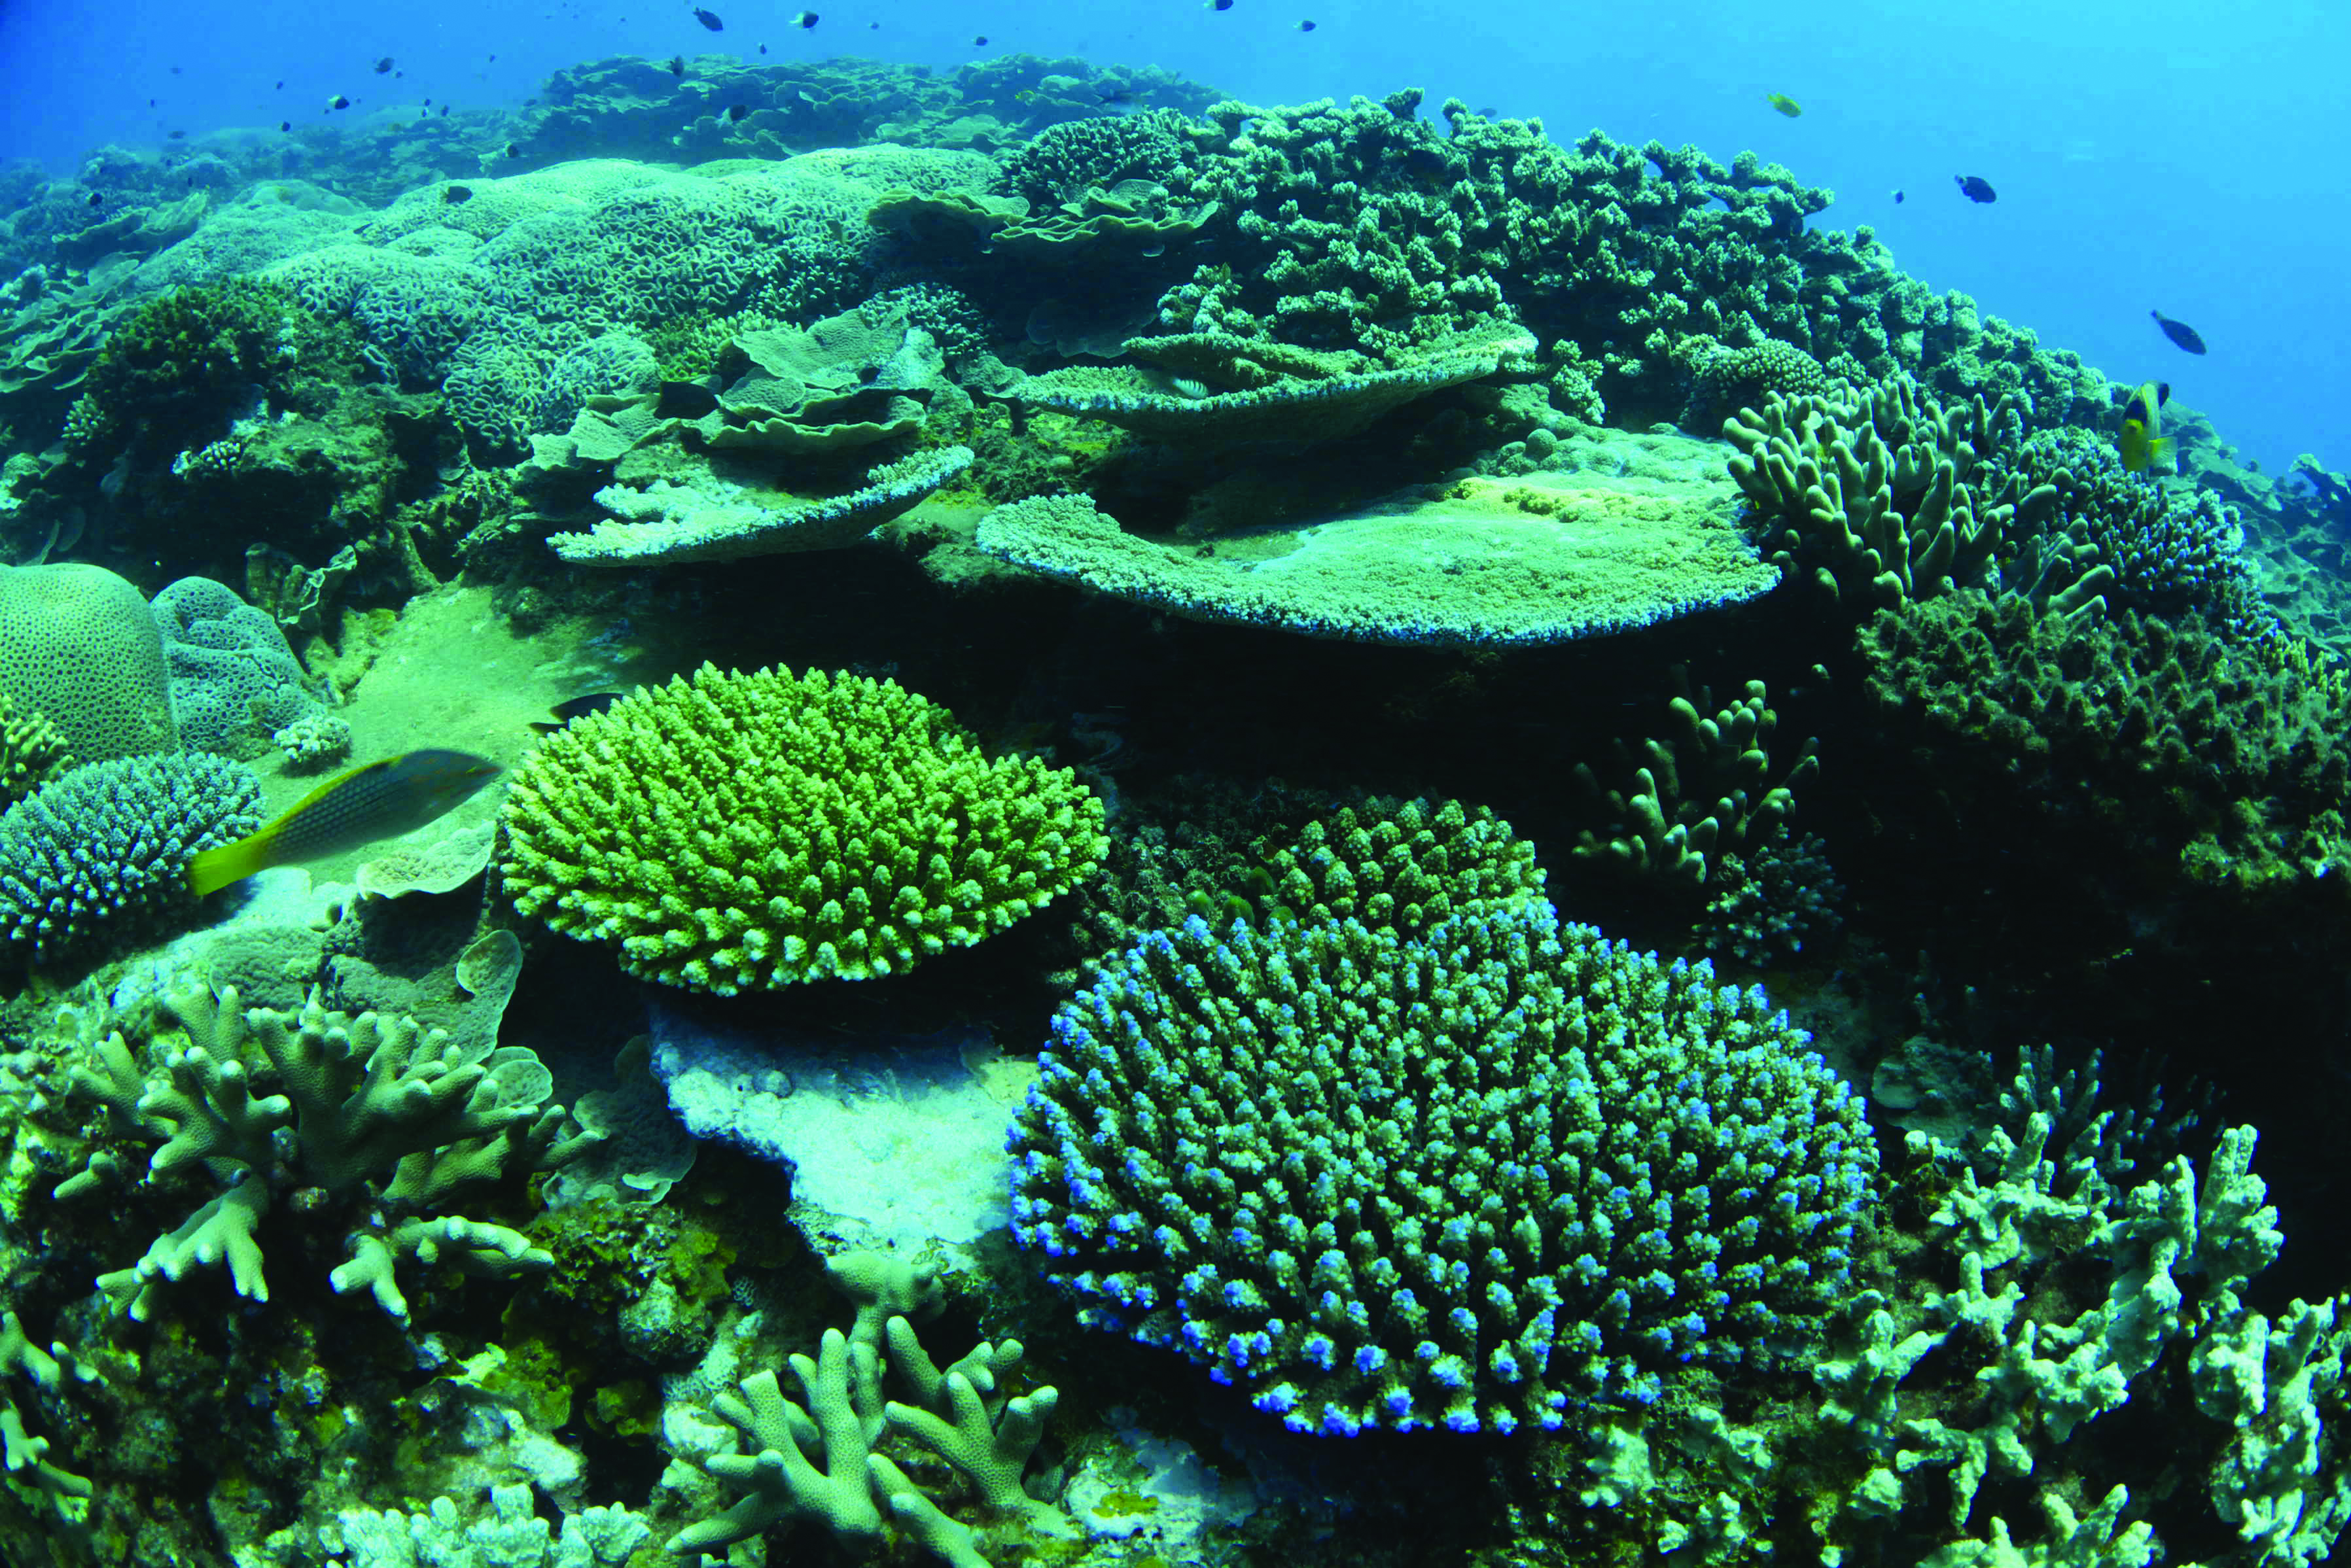 Image: Globally around 500 million people are dependent on coral reefs for food or income.  Community managed protected areas are vital for protecting fisheries and safeguarding marine biodiversity. (Credit: Blue Ventures / Garth Cripps)